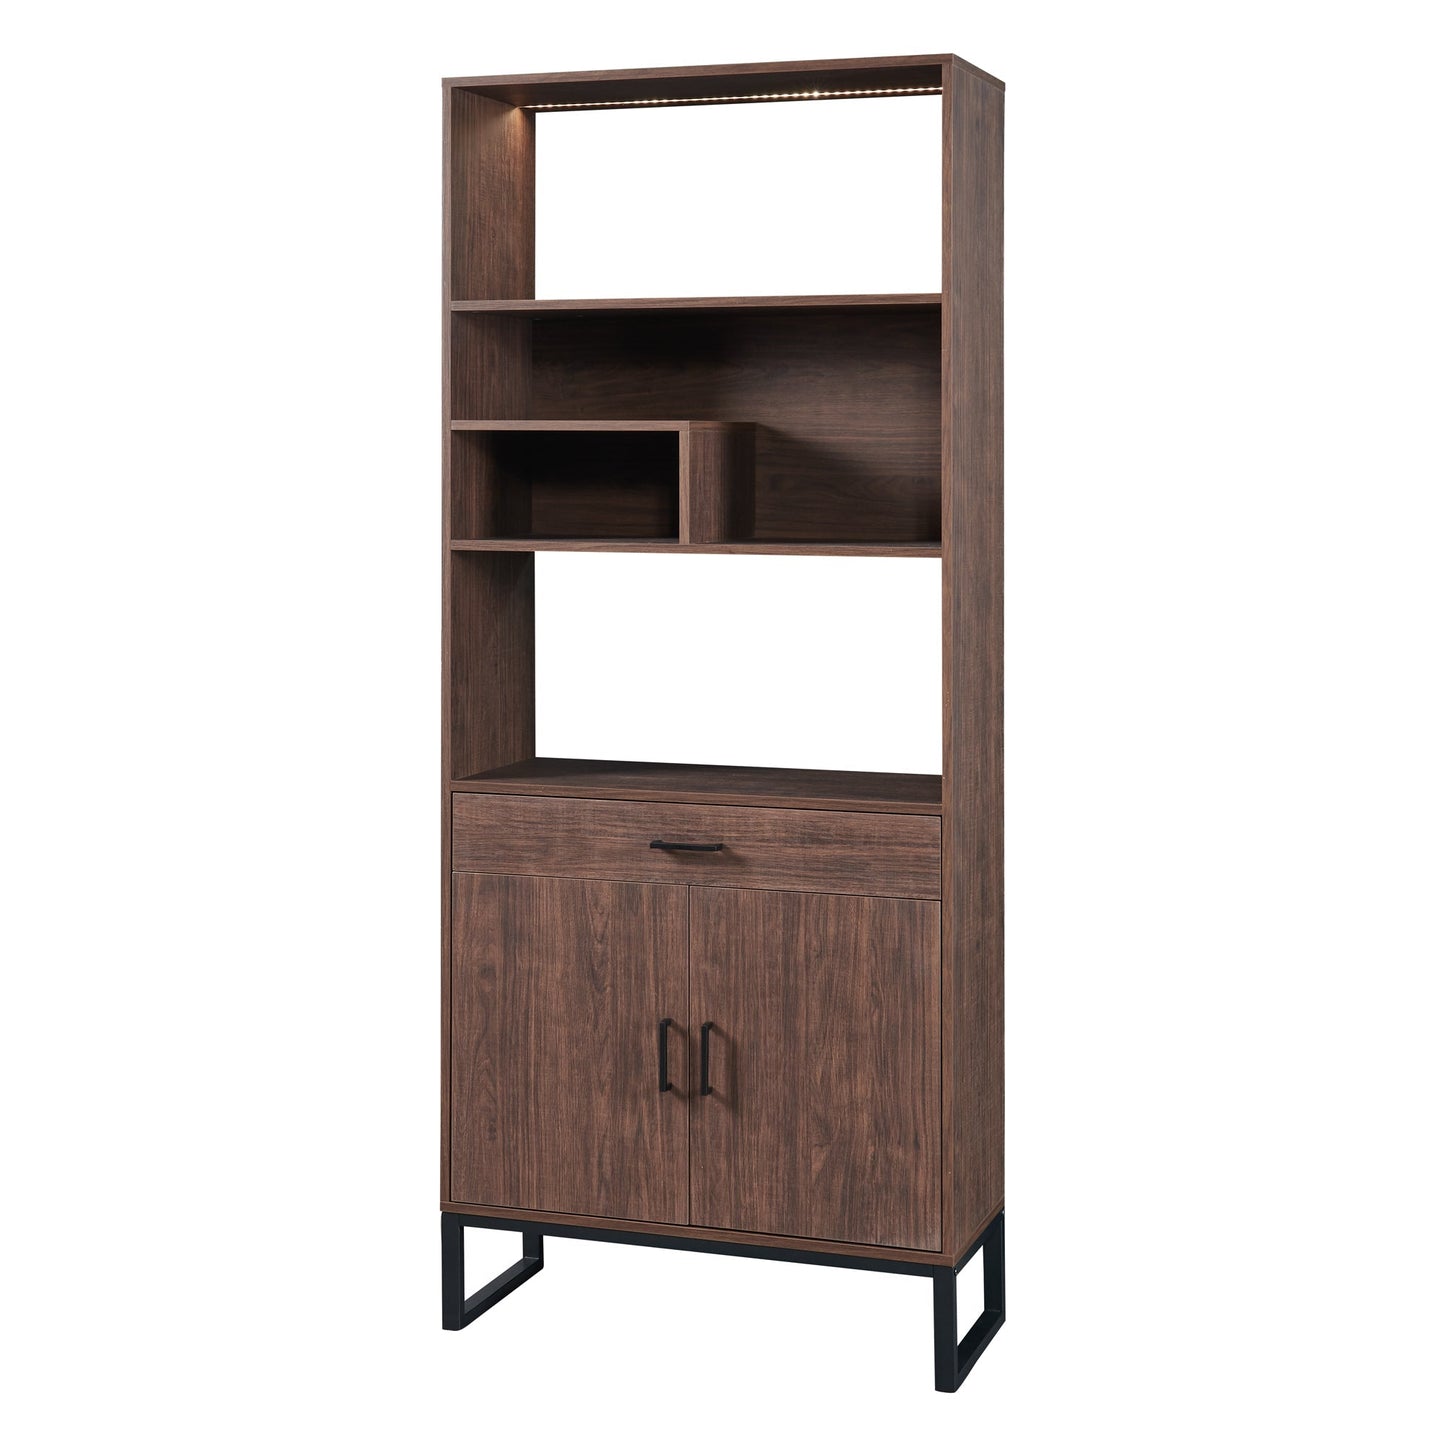 75.9"Modern Open Bookshelf with Doors, Bookcase with Storage drawer and LED Strip Lights,Free Standing Display Rack,Wooden Tall Bookshelf for Living Room and Office, Walnut